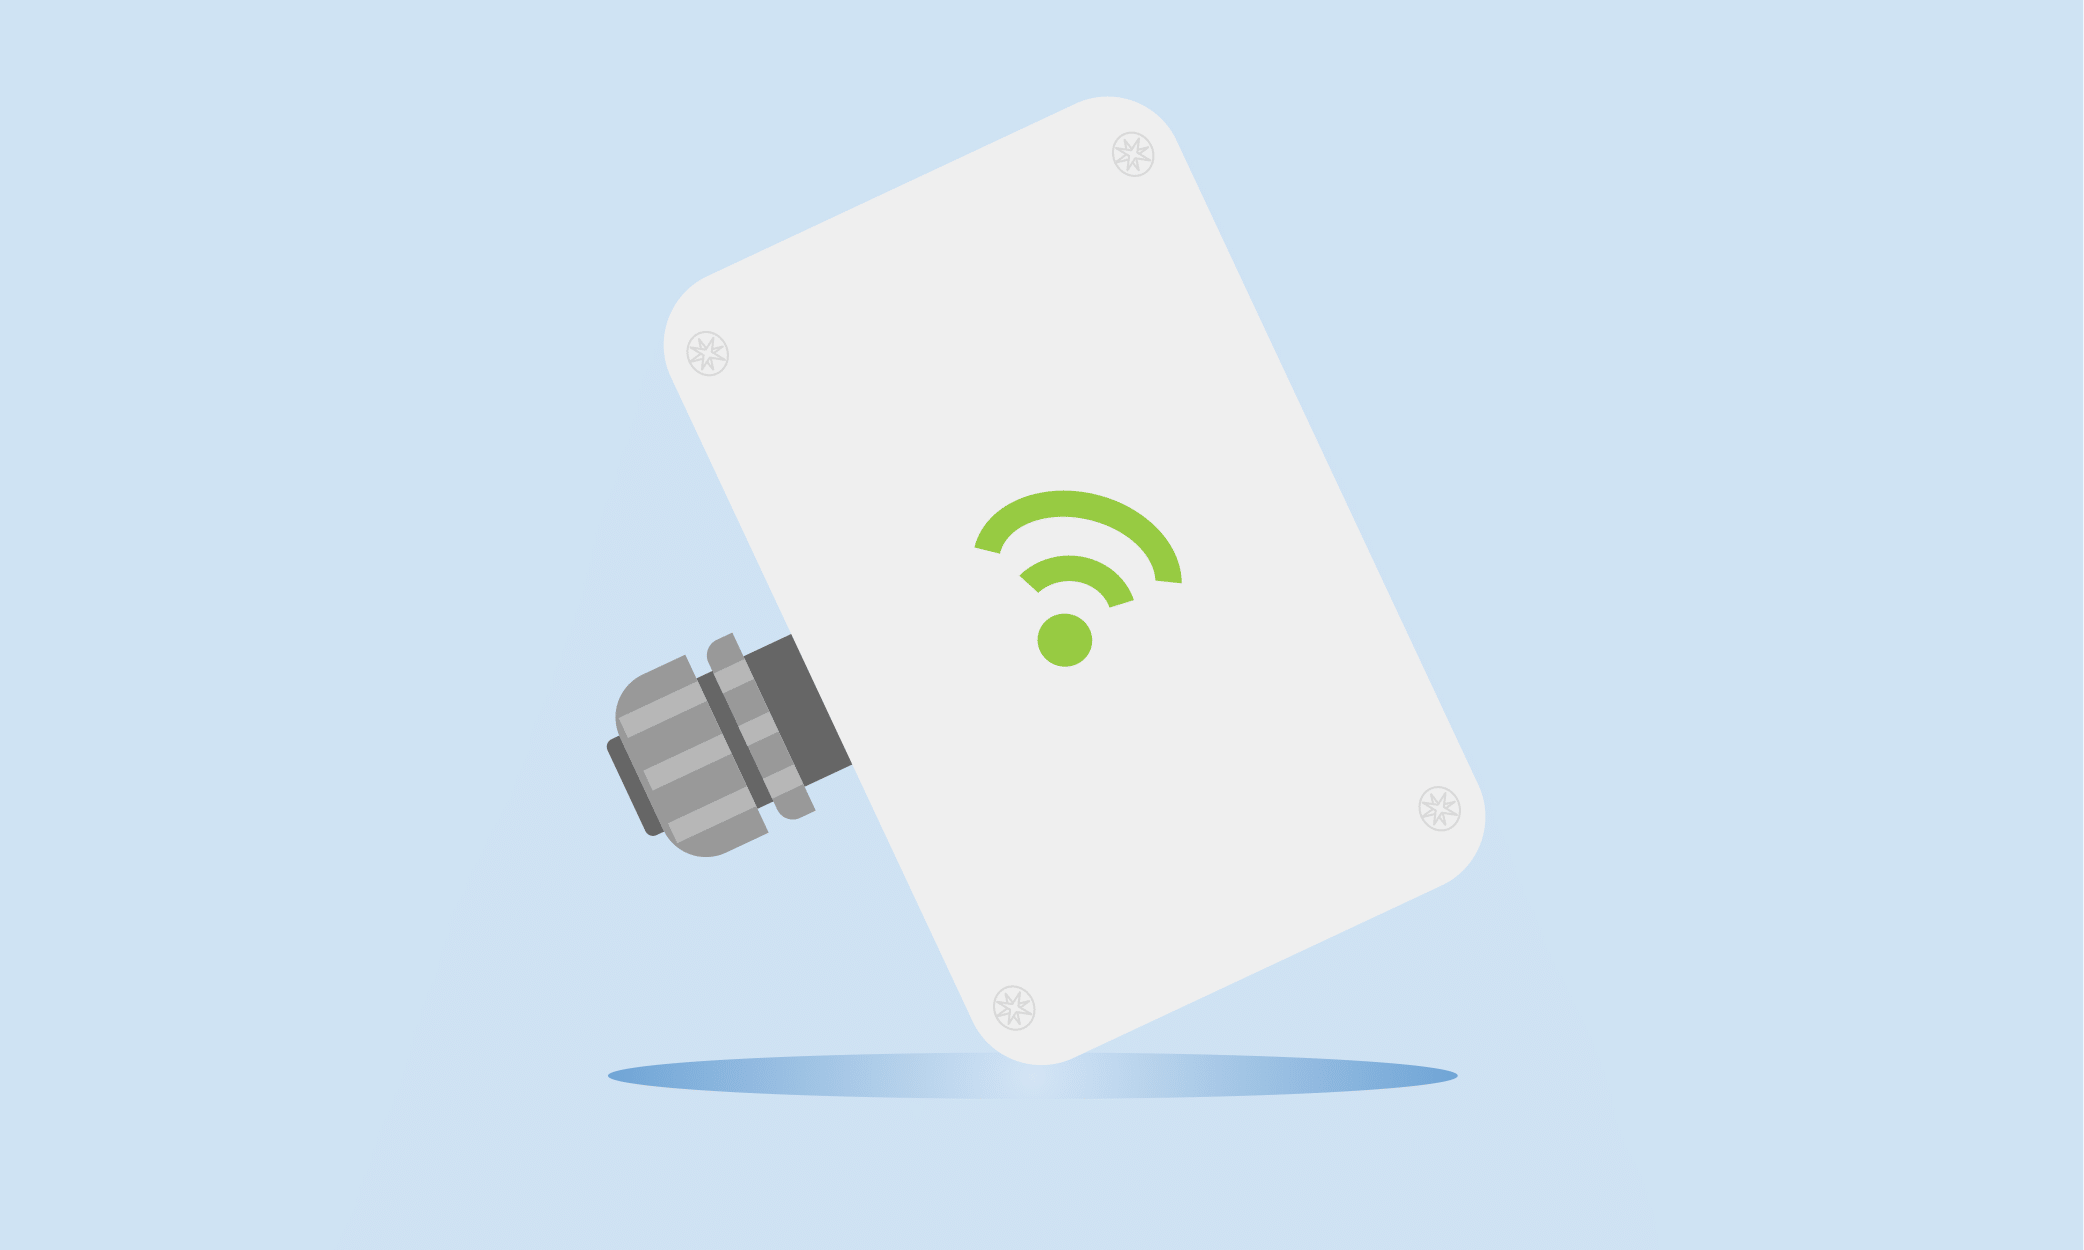 Advantages and Applications of Wireless Load Cells